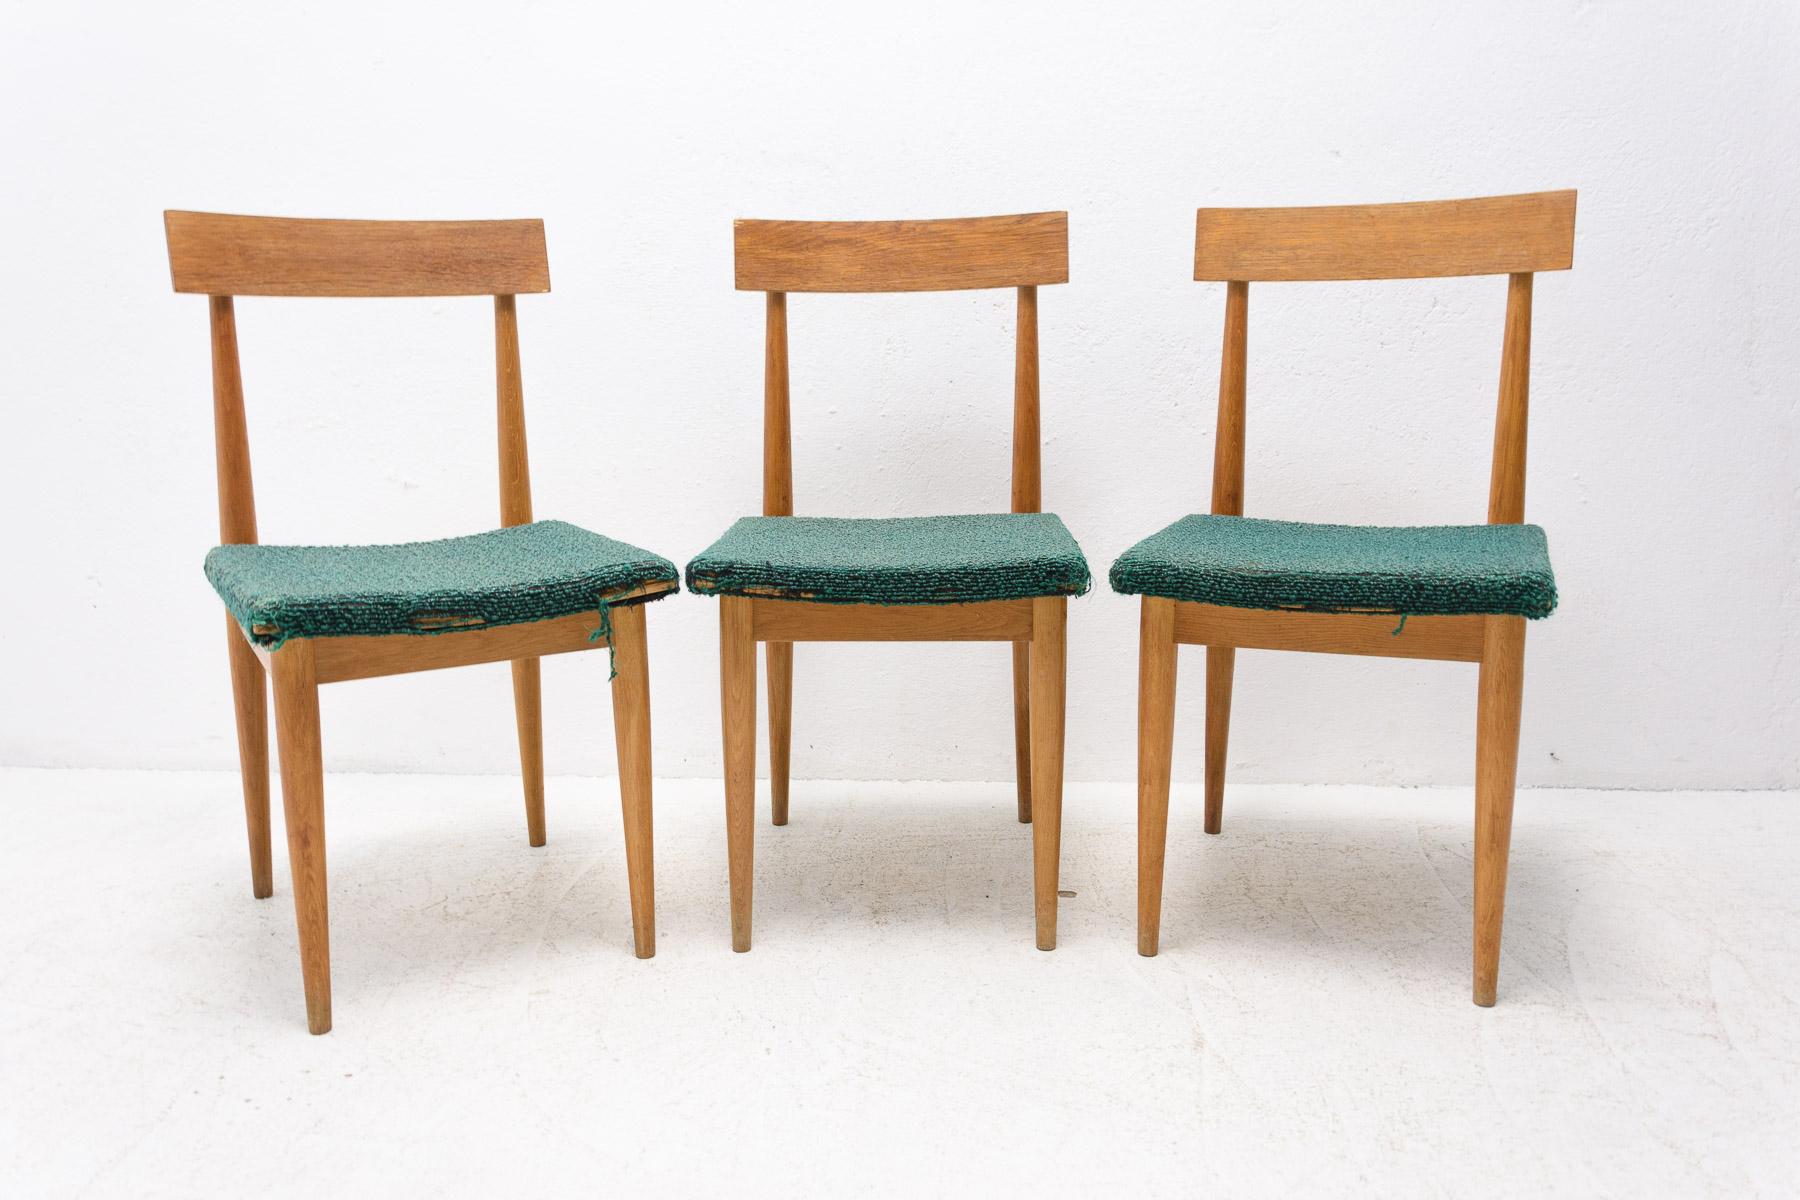 These upholstered dining chairs were made in the former Czechoslovakia by JITONA company in the 1970´s.
These are in good Vintage condition with traces of wear and tear commensurate with age. Beech wood.
Very nice model. Price is for the set of